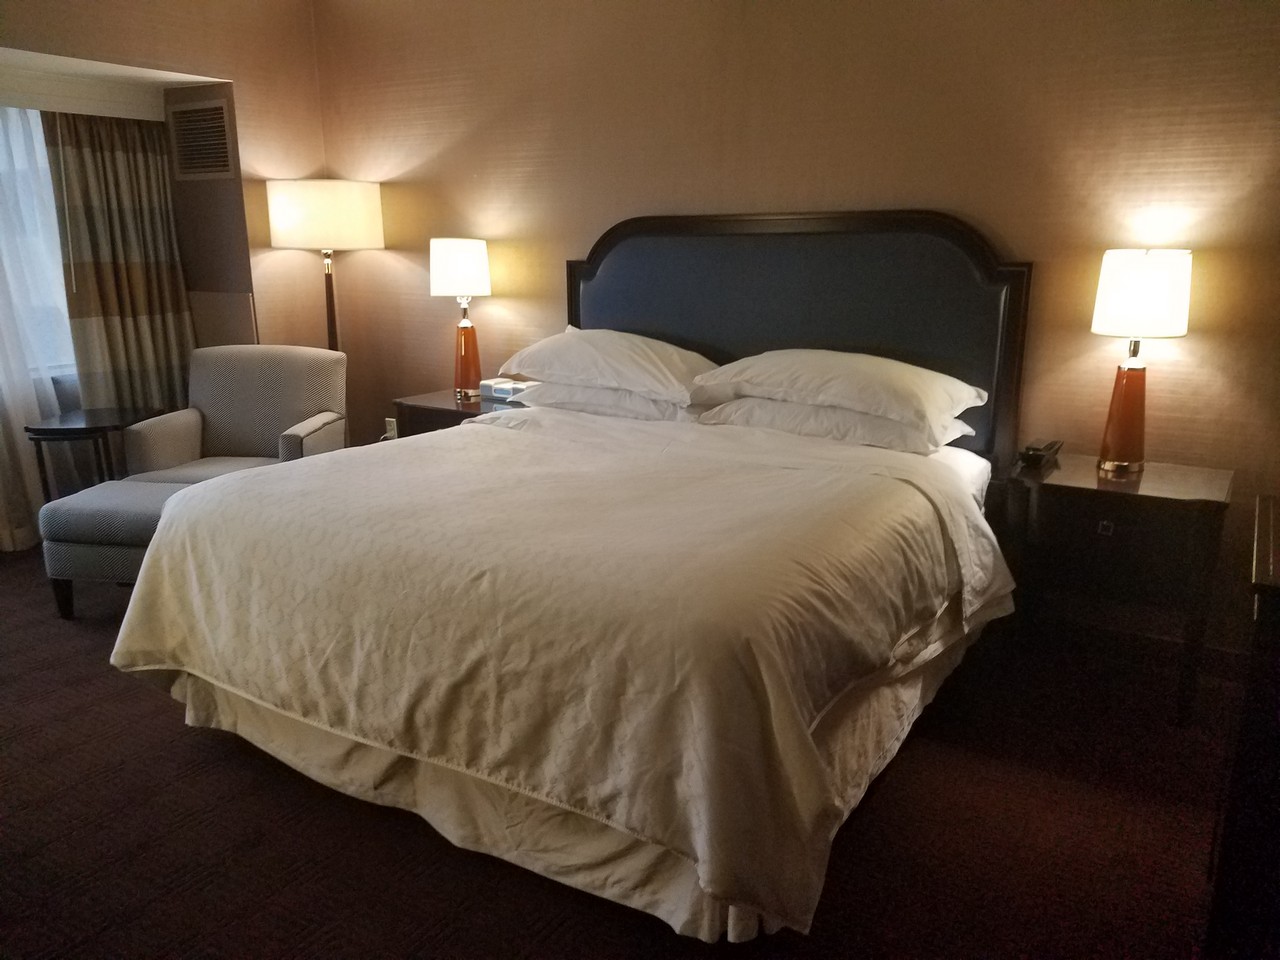 The bed looked half made